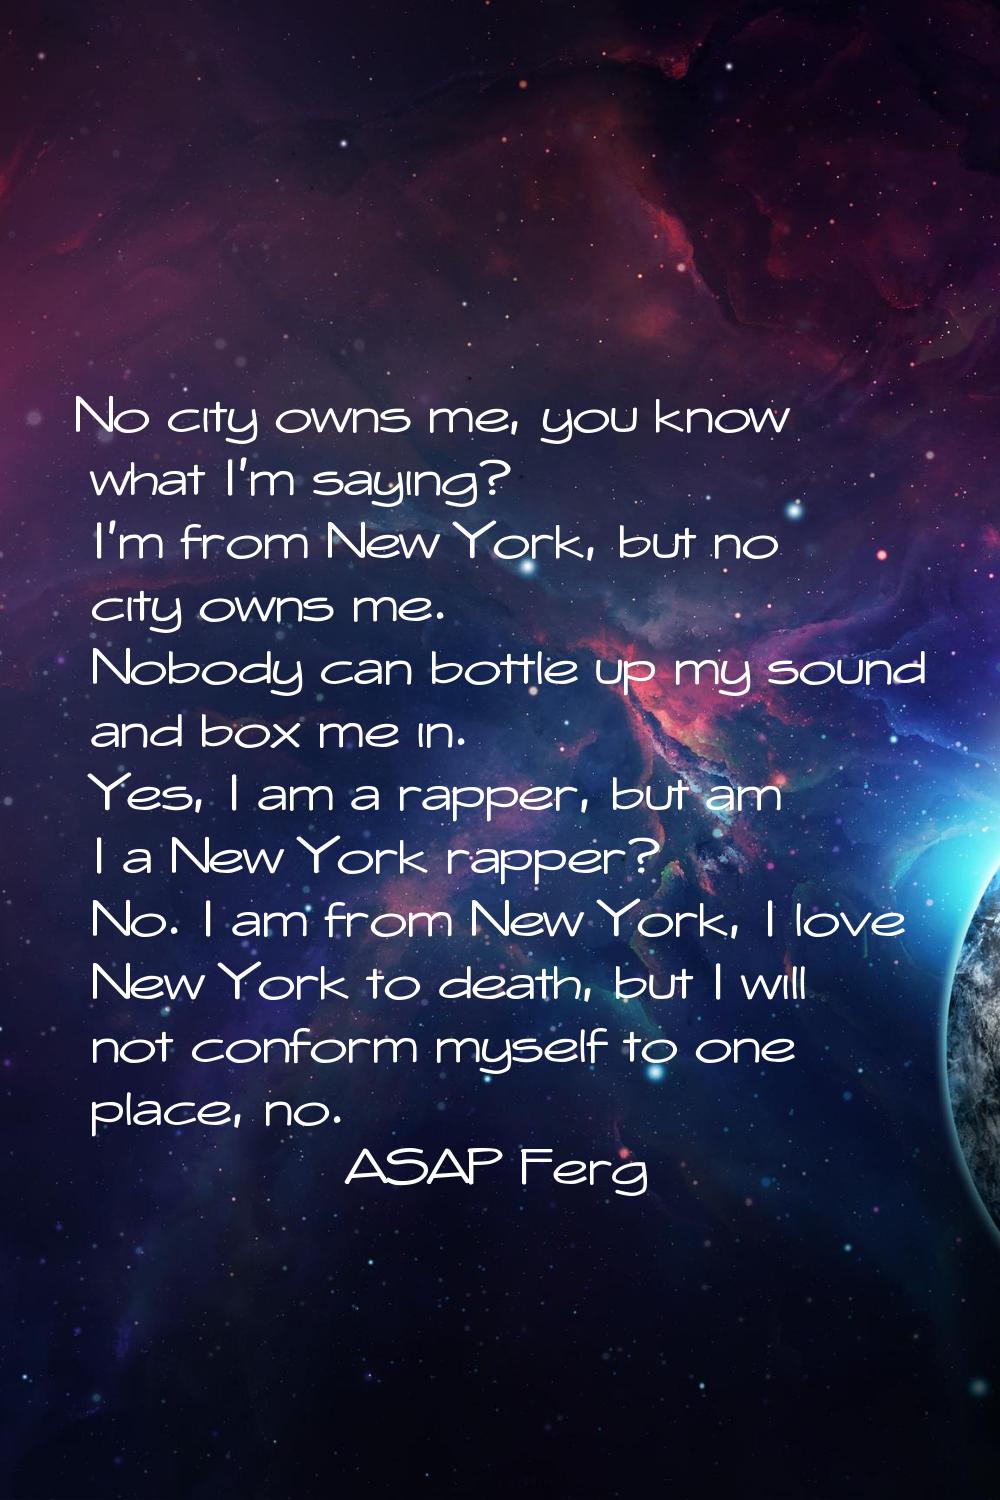 No city owns me, you know what I'm saying? I'm from New York, but no city owns me. Nobody can bottl